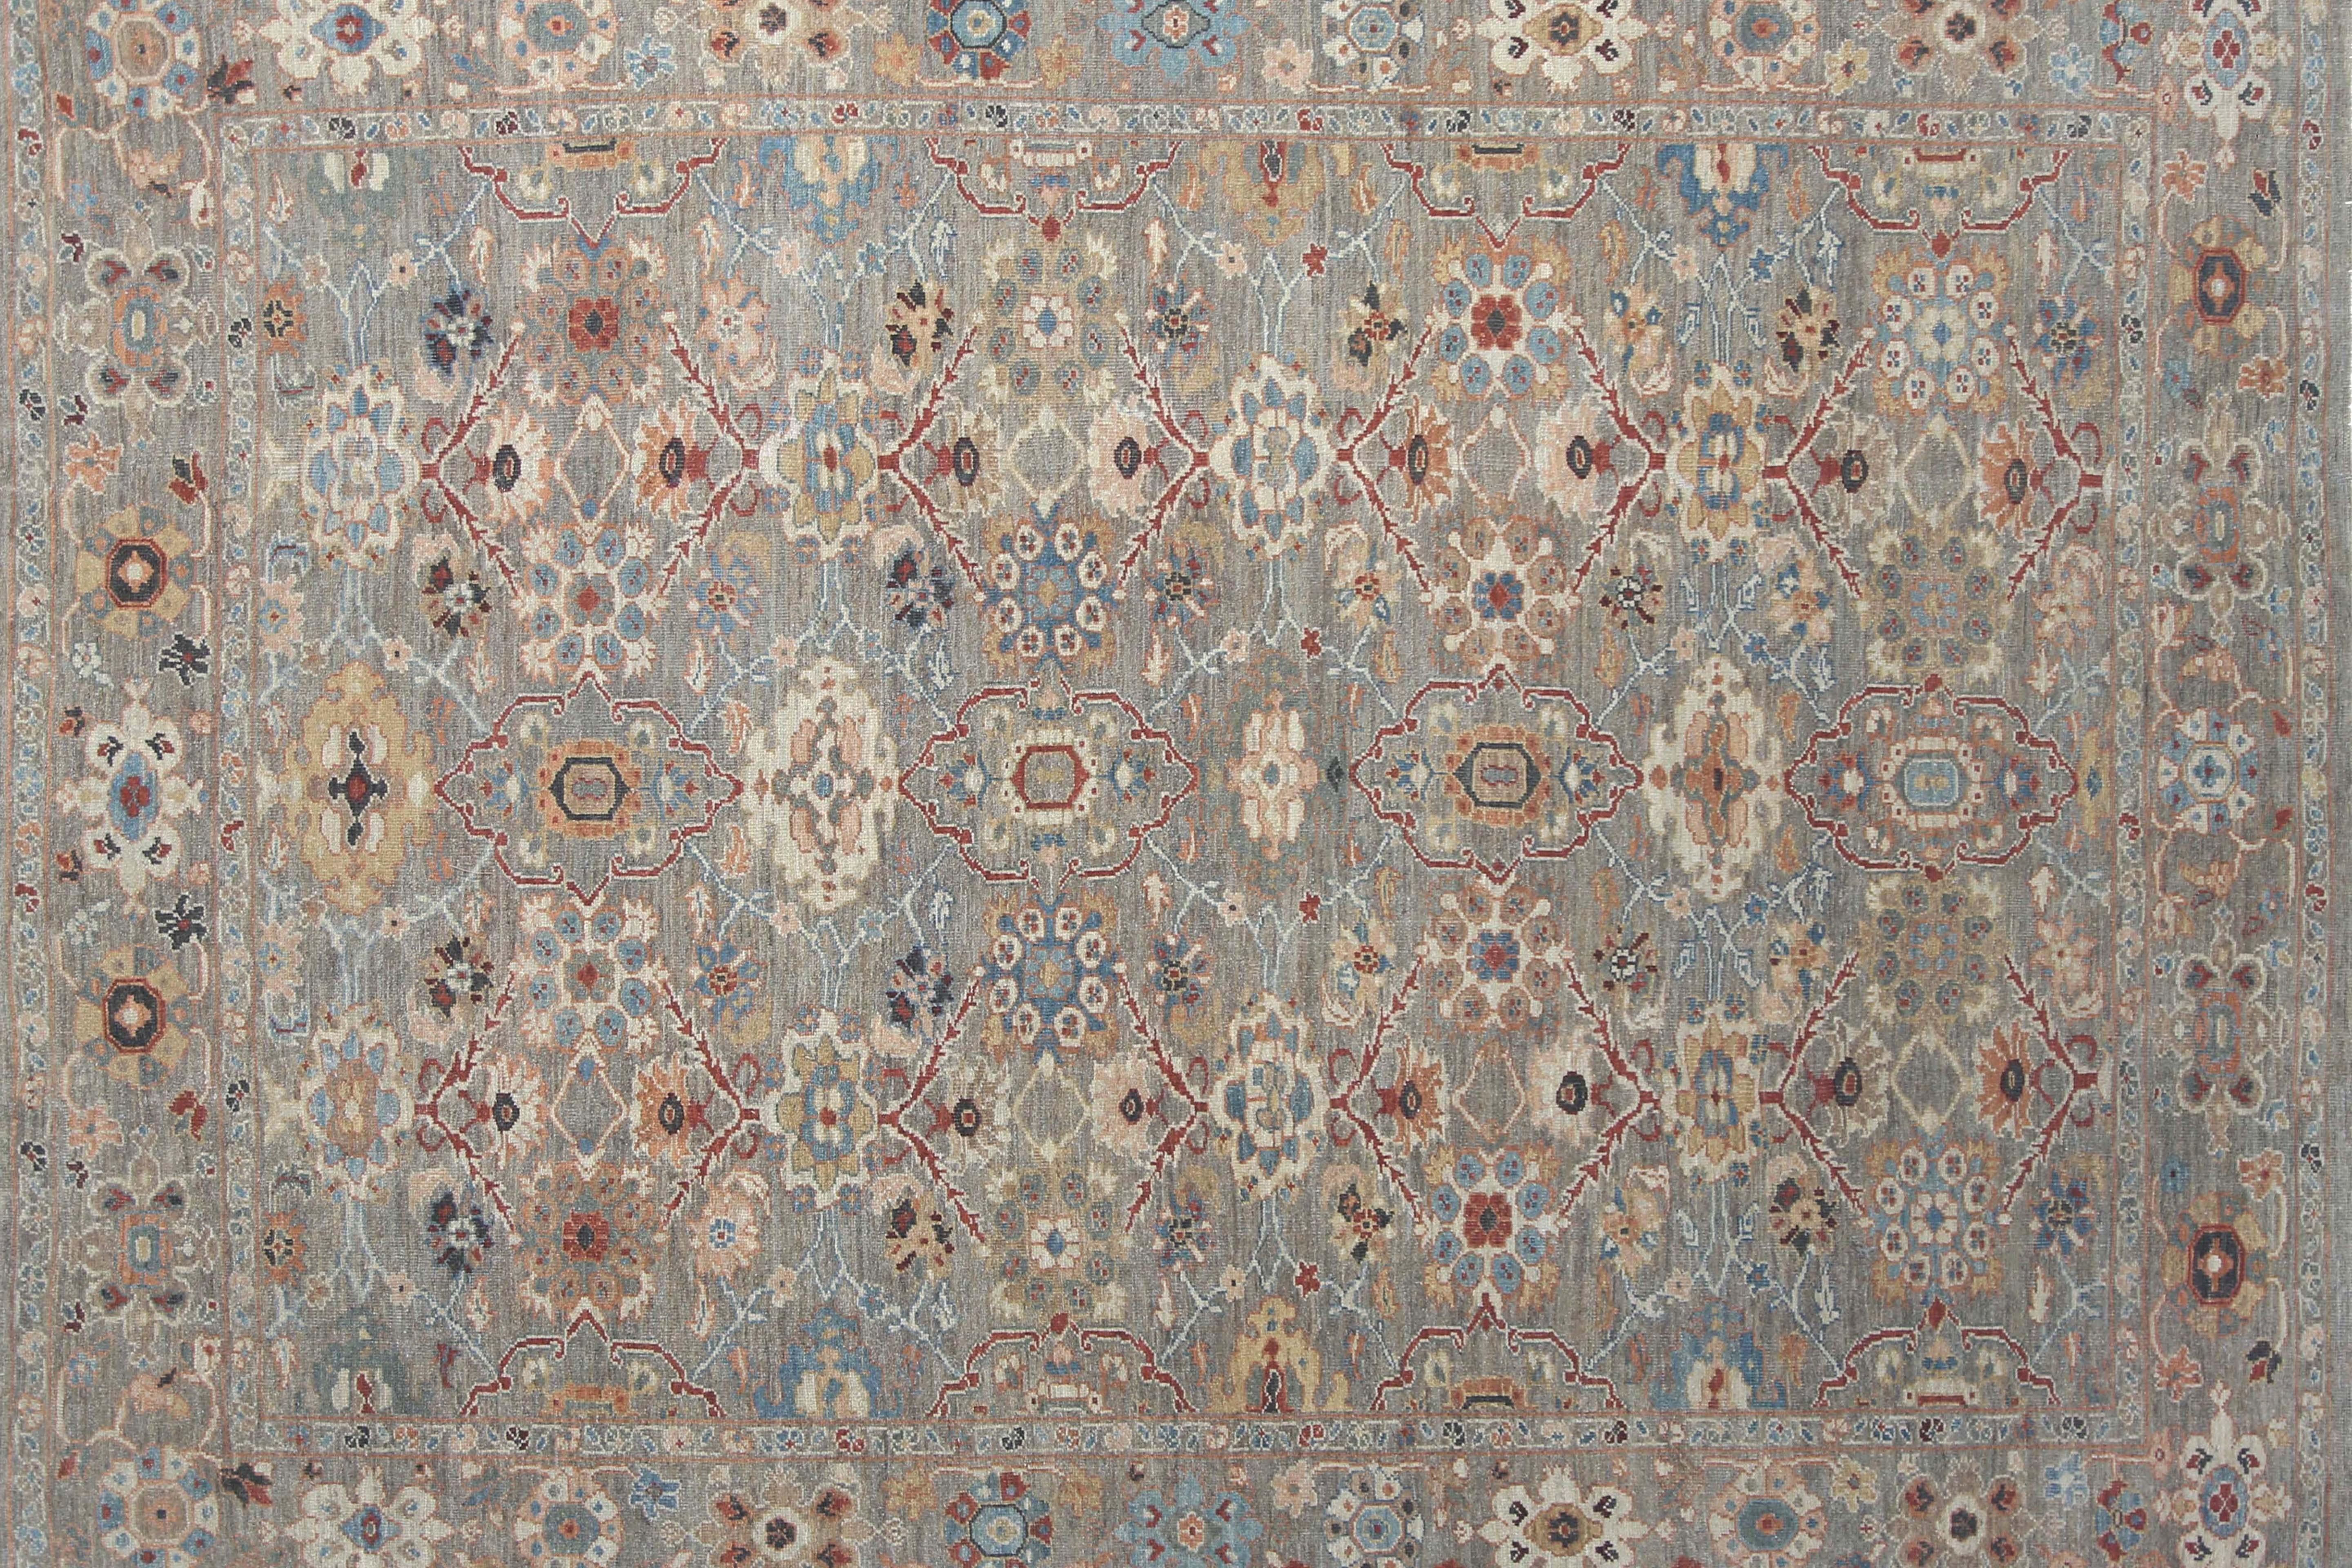 Exquisite Detailed Sultanabad Rug Design For Sale 5